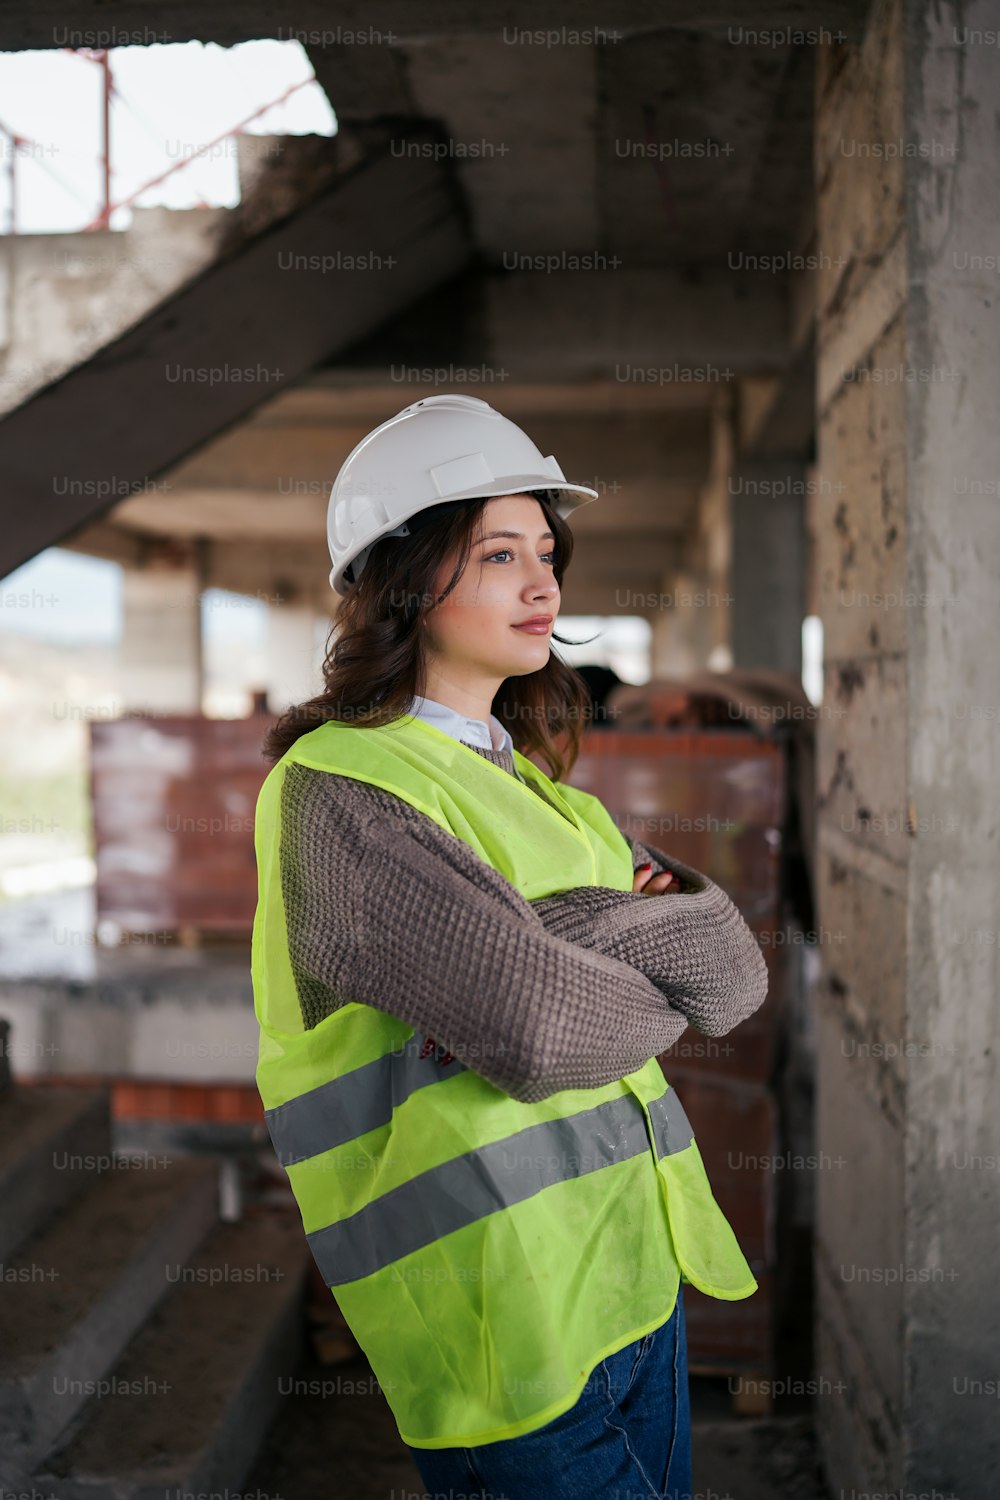 a woman wearing a hard hat and safety vest